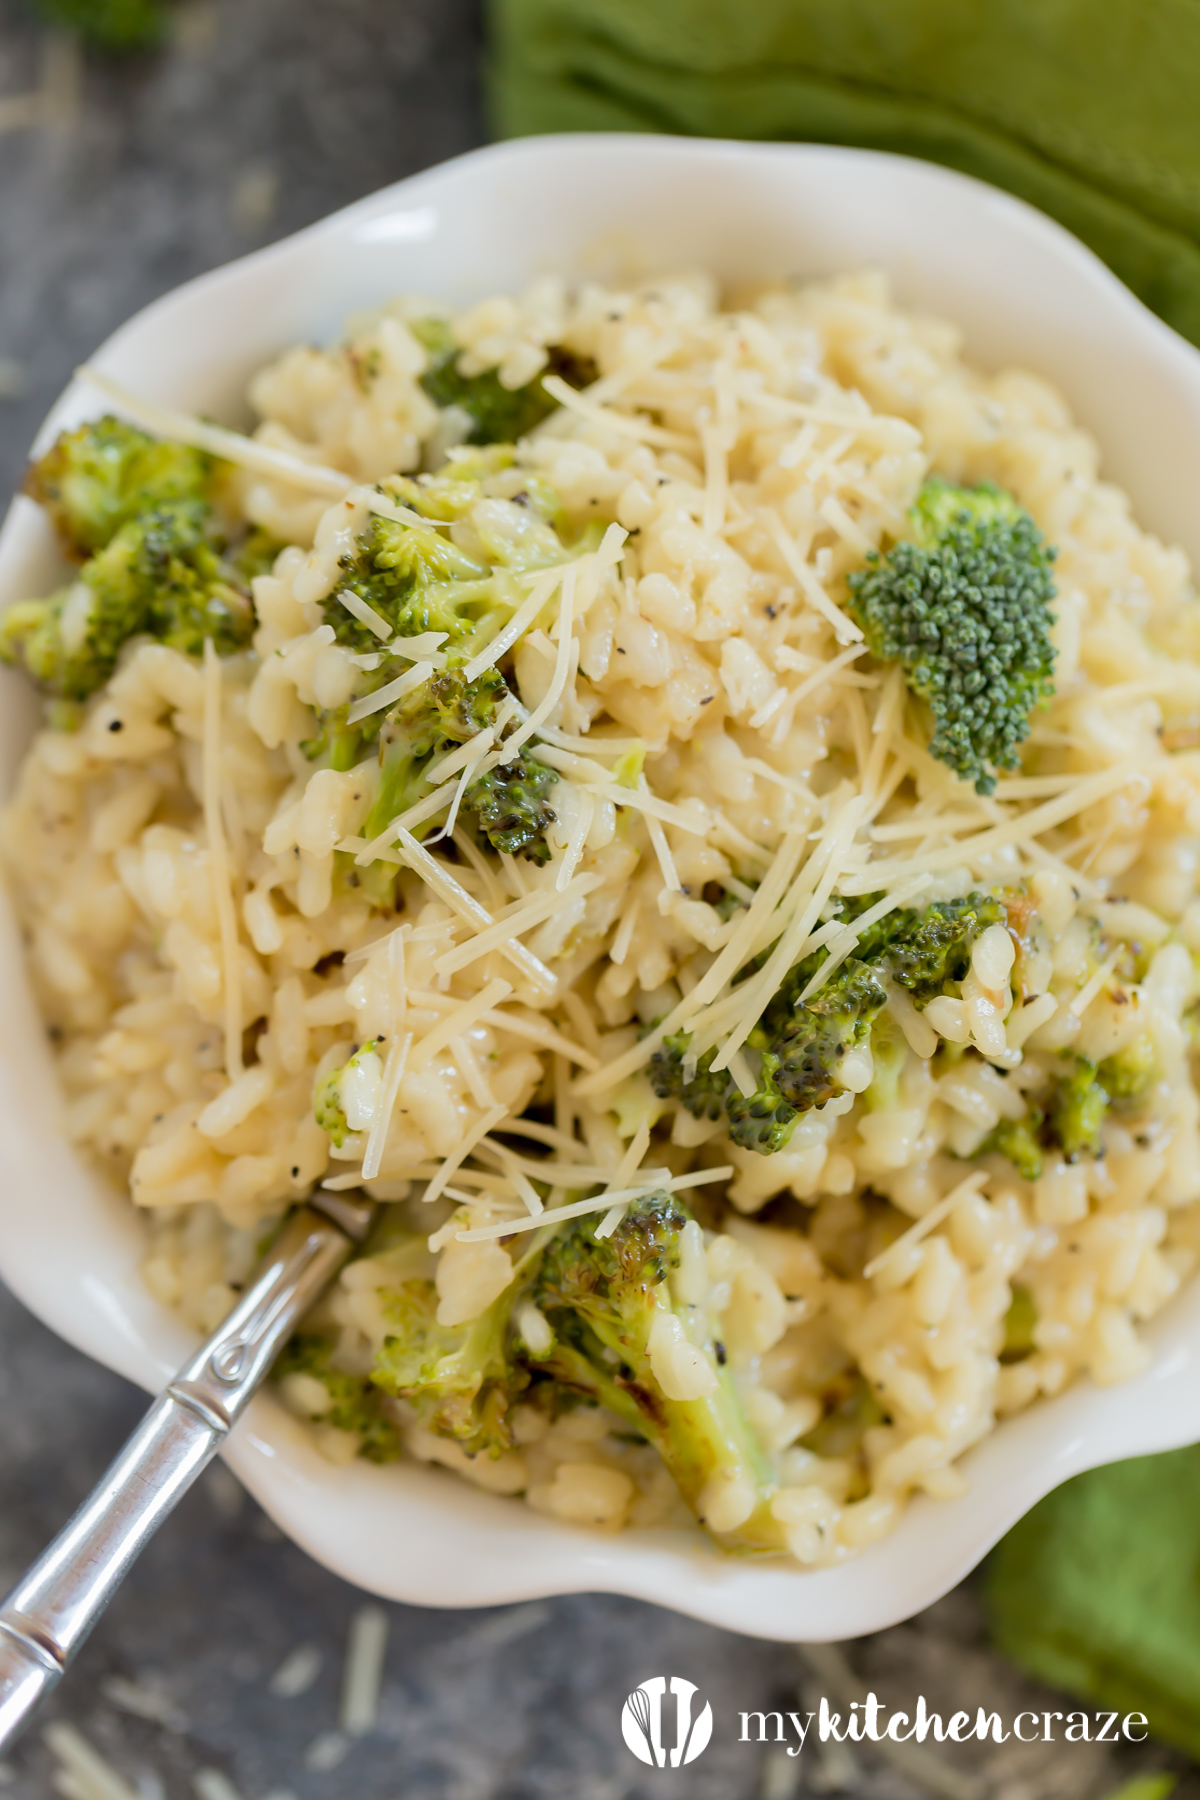 Roasted Broccoli Risotto is the perfect side dish to accompany fish and chicken entrees. This rice is easy to throw together, creamy and has the perfect flavors.